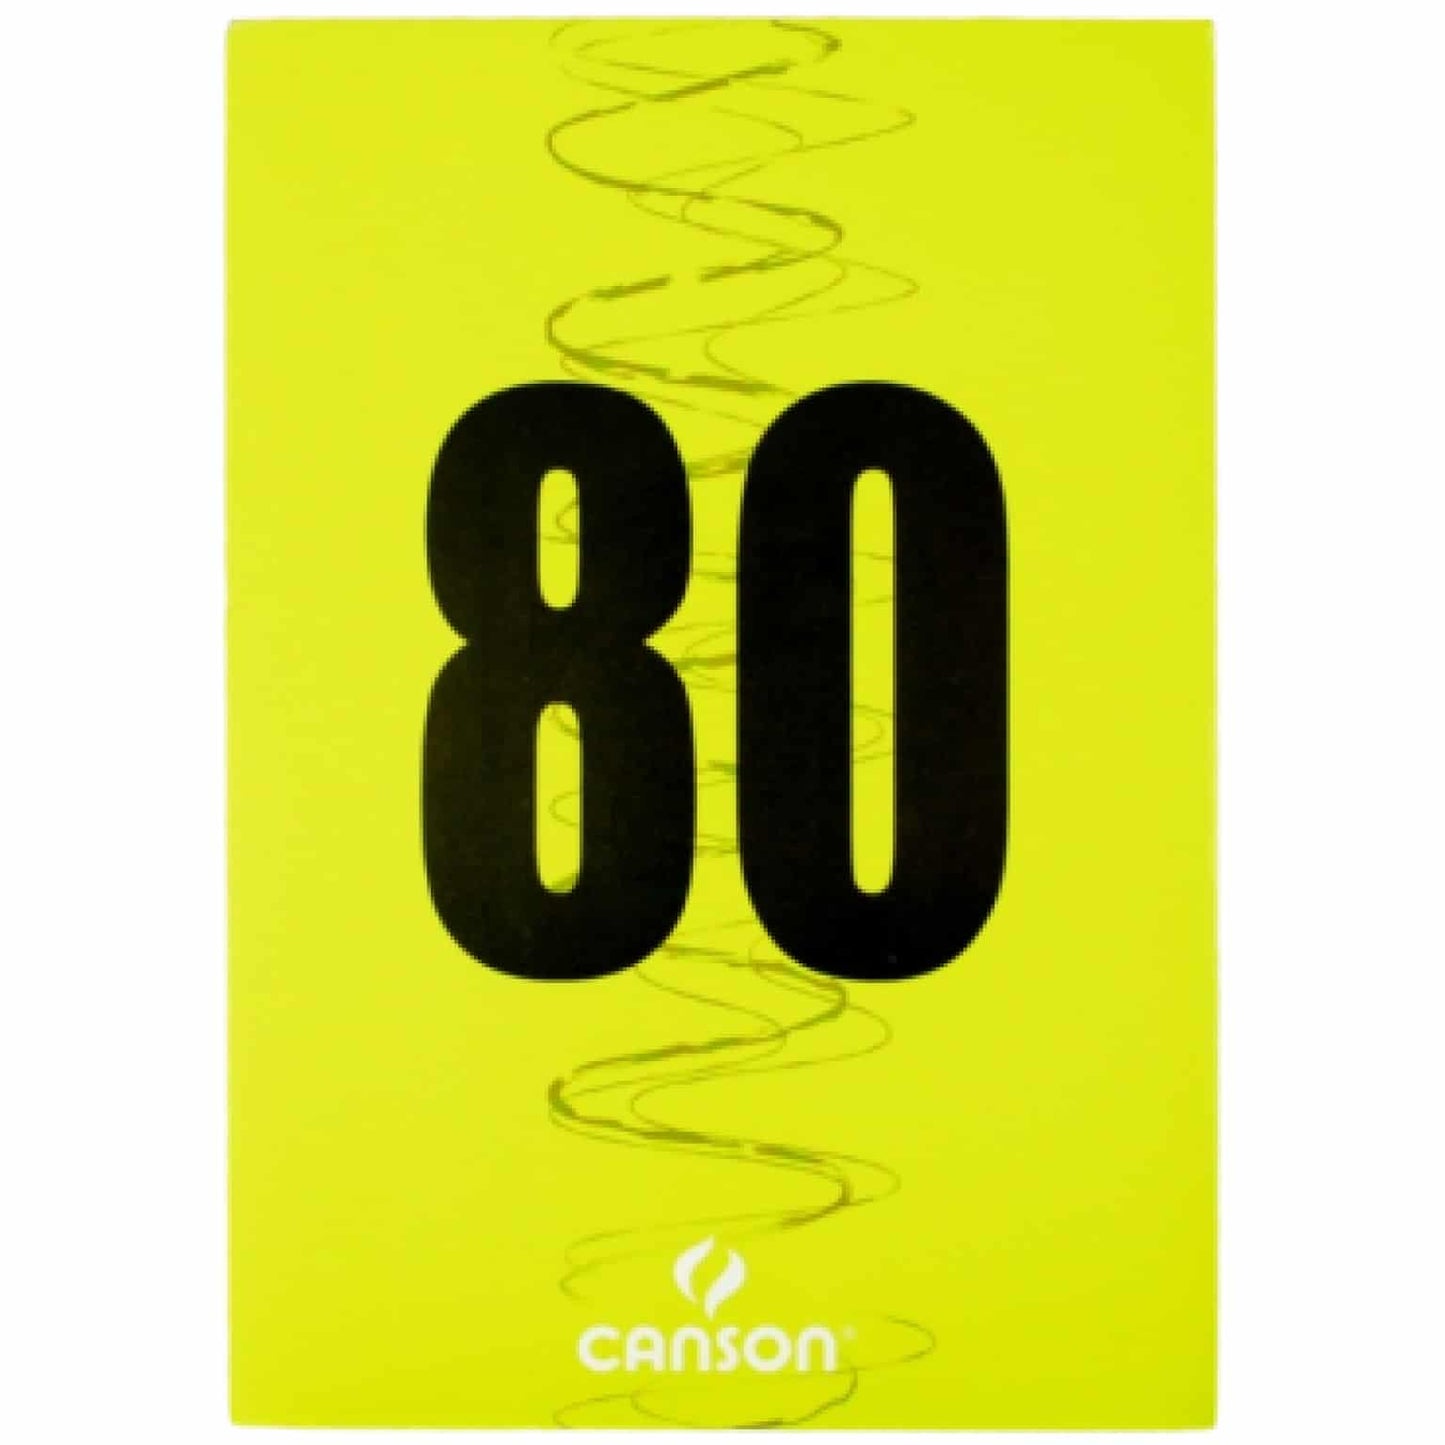 Canson Sketch Pad 80 gsm A5 Size || A5 كراسة رسم كانسون ٨٠ جرام حجم 